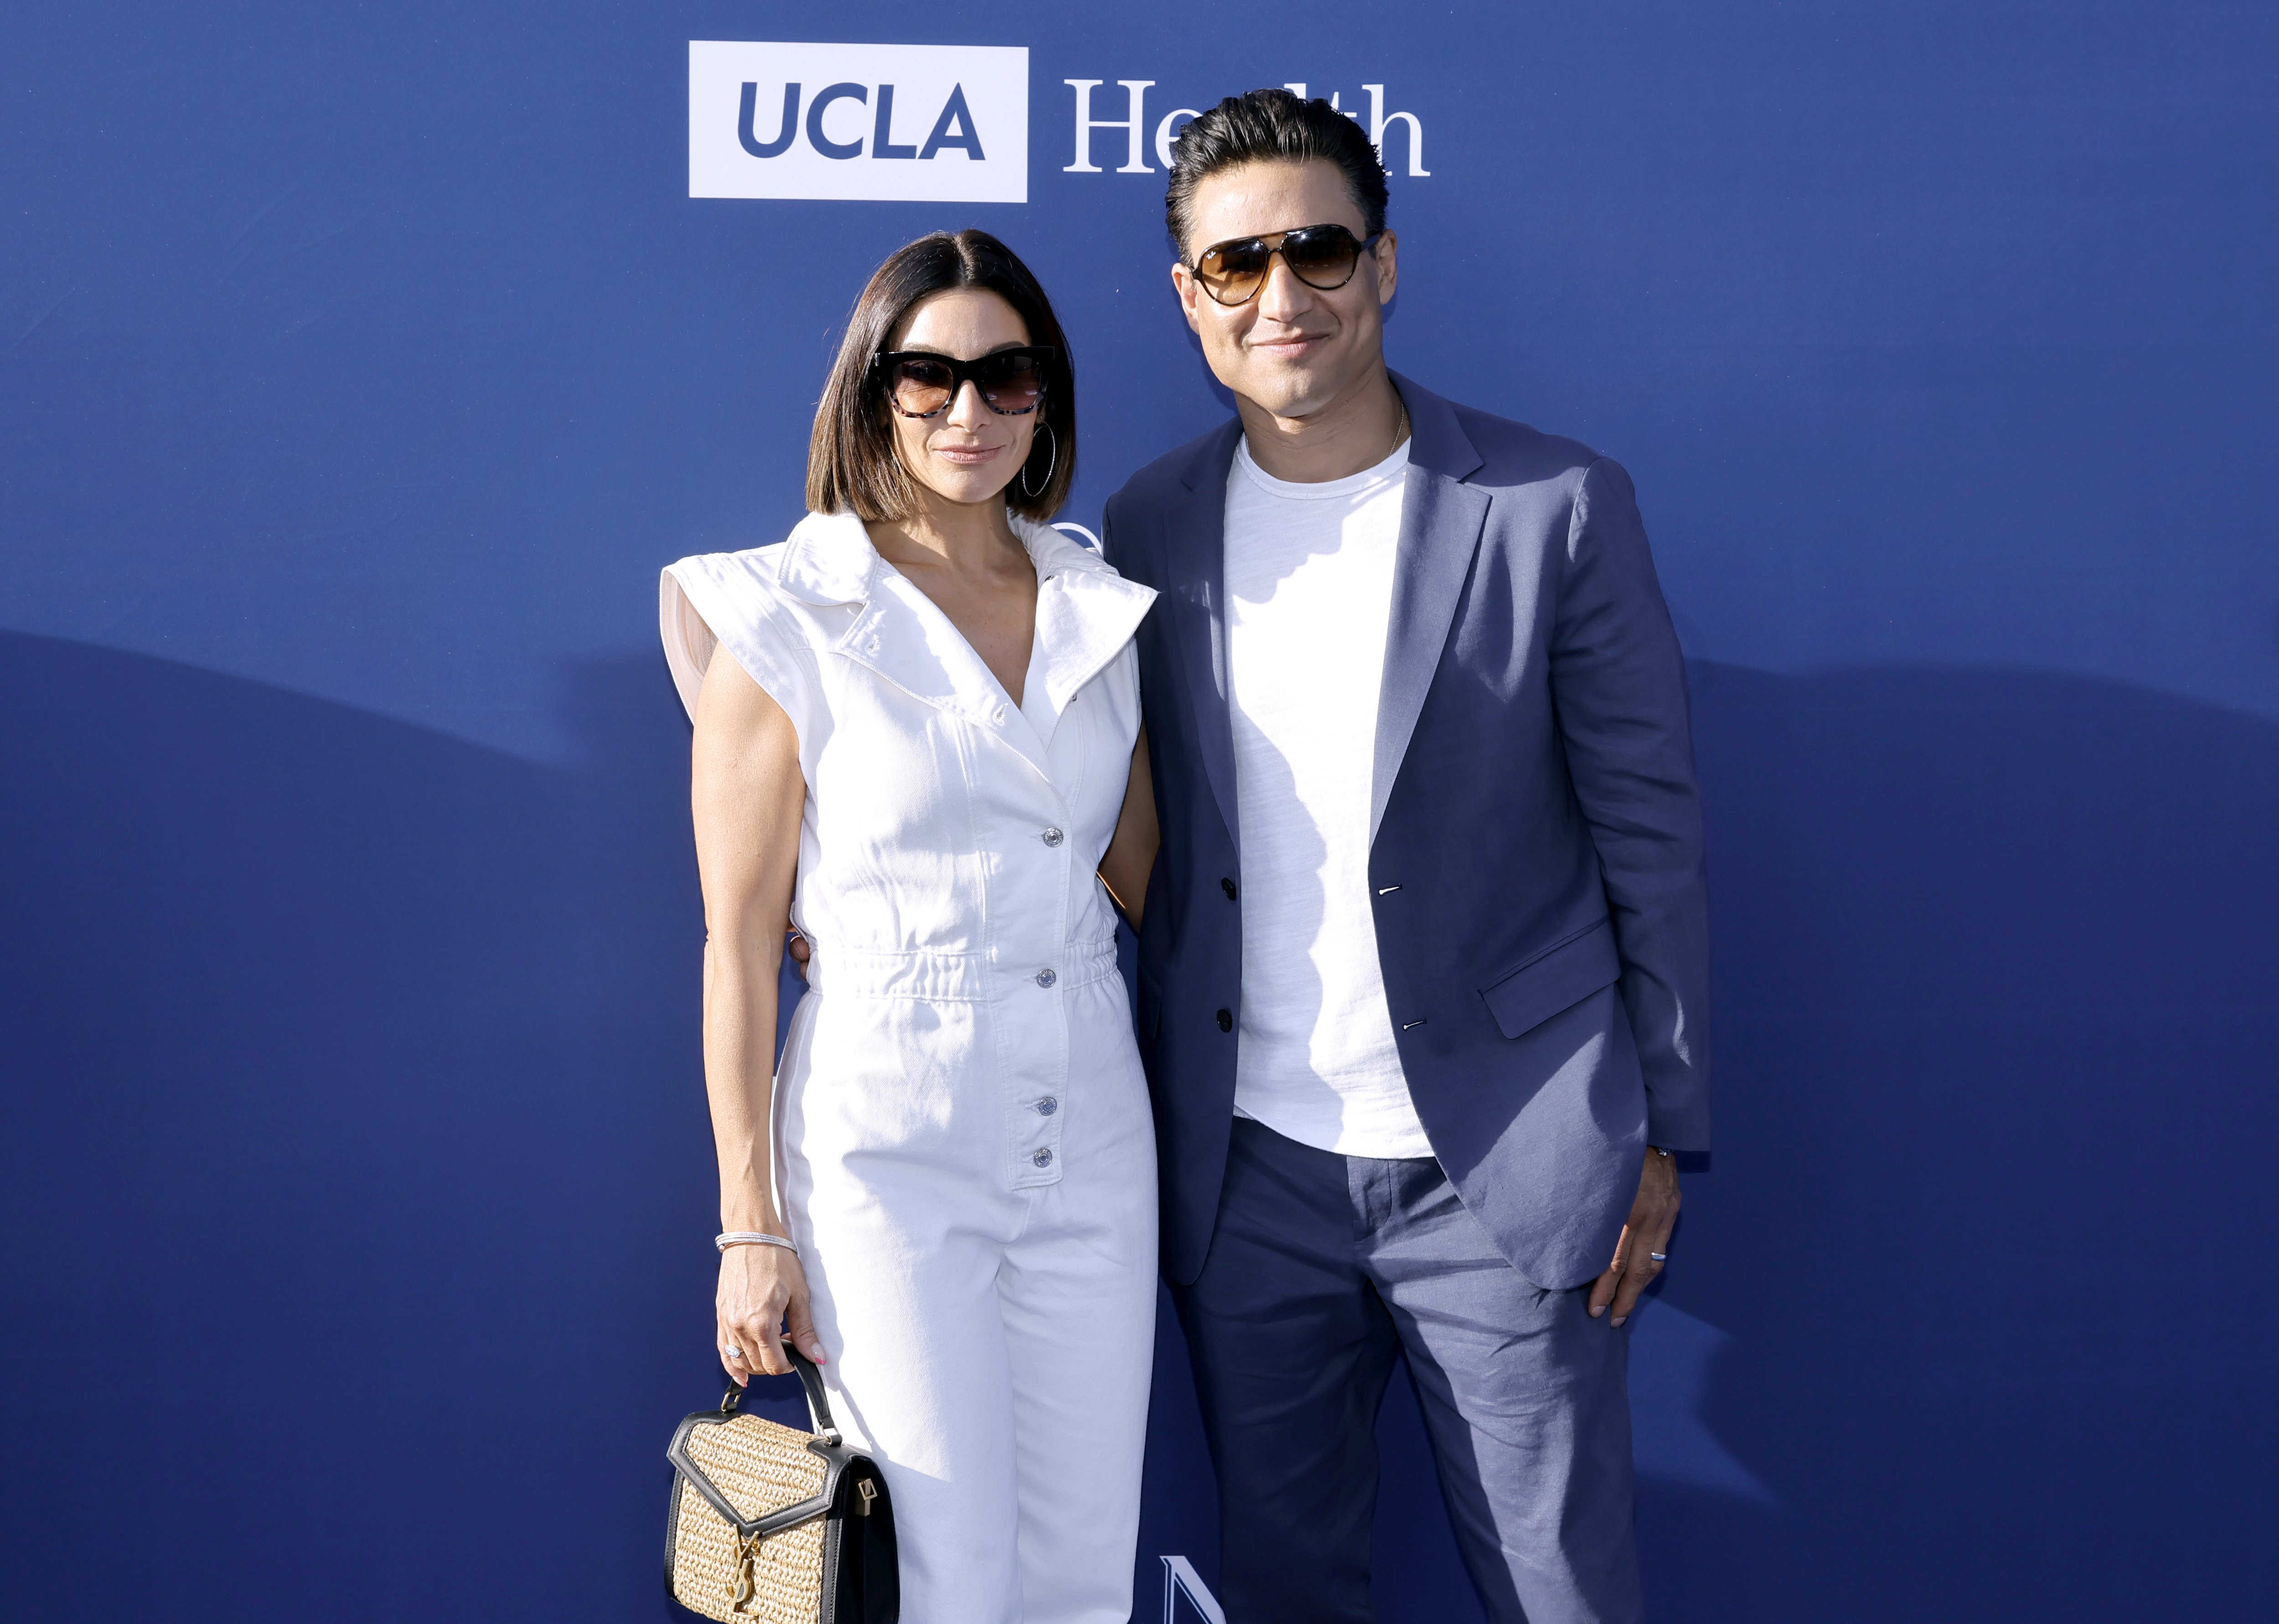  Courtney Laine Mazza and Mario Lopez attend Los Angeles Dodgers Foundation's annual Blue Diamond Gala on June 16, 2022, in Los Angeles, California. | Source: Getty Images